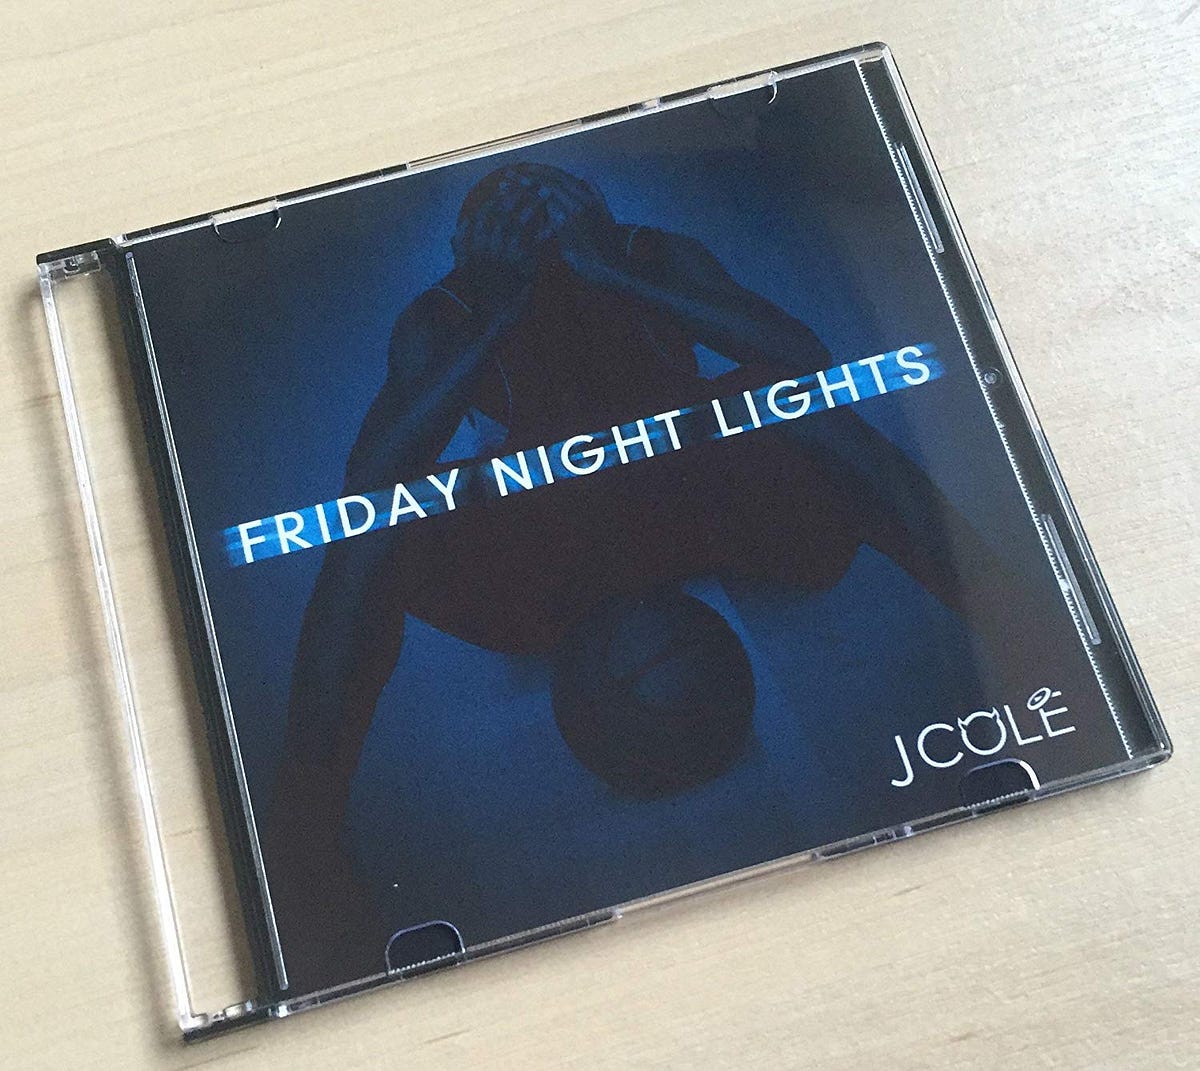 Late Reviews. Friday Night Lights by J. Cole | by Ryal KN | Musings on Hip-  Hop | Medium